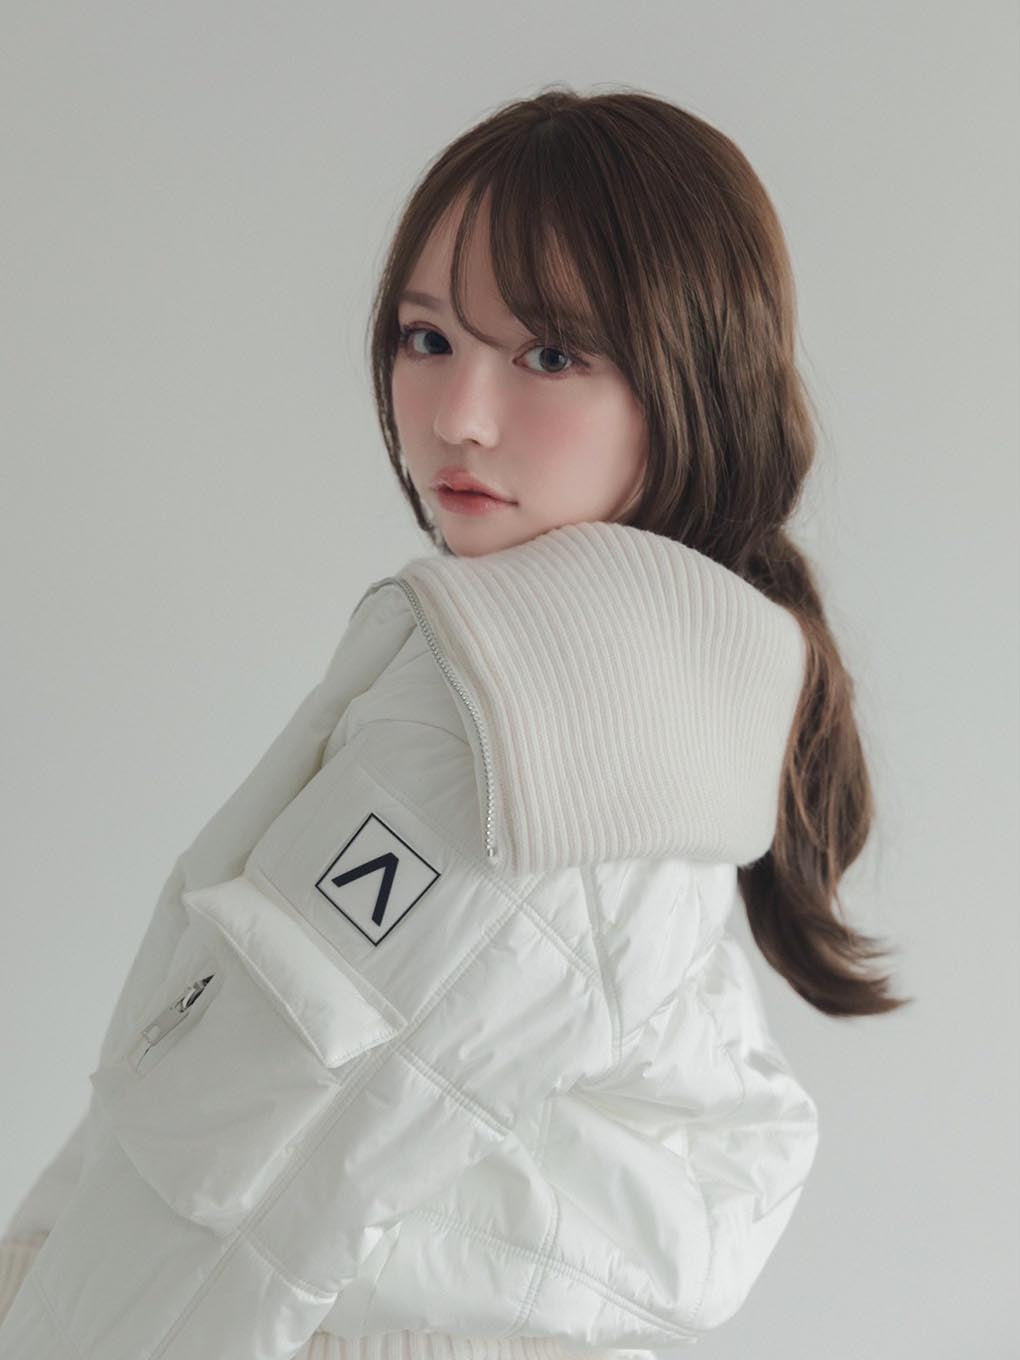 andmary Mary quilting jacket 白　skirt新品未使用未開封でお送りします